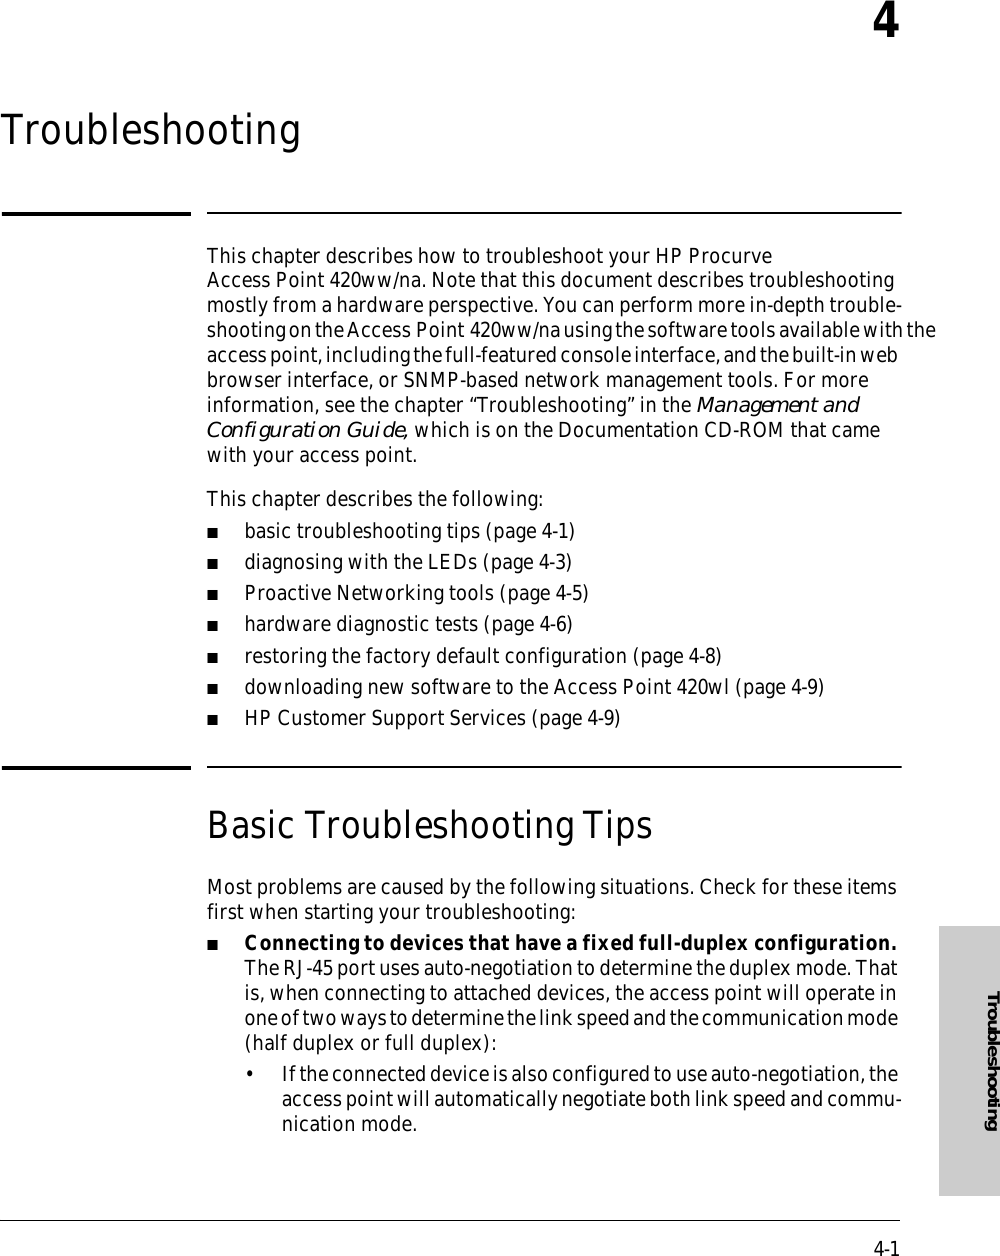 4-1Troubleshooting4TroubleshootingThis chapter describes how to troubleshoot your HP Procurve Access Point 420ww/na. Note that this document describes troubleshooting mostly from a hardware perspective. You can perform more in-depth trouble-shooting on the Access Point 420ww/na using the software tools available with the access point, including the full-featured console interface, and the built-in web browser interface, or SNMP-based network management tools. For more information, see the chapter “Troubleshooting” in the Management and Configuration Guide, which is on the Documentation CD-ROM that came with your access point.This chapter describes the following:■basic troubleshooting tips (page 4-1)■diagnosing with the LEDs (page 4-3)■Proactive Networking tools (page 4-5)■hardware diagnostic tests (page 4-6)■restoring the factory default configuration (page 4-8)■downloading new software to the Access Point 420wl (page 4-9)■HP Customer Support Services (page 4-9)Basic Troubleshooting TipsMost problems are caused by the following situations. Check for these items first when starting your troubleshooting:■Connecting to devices that have a fixed full-duplex configuration. The RJ-45 port uses auto-negotiation to determine the duplex mode. That is, when connecting to attached devices, the access point will operate in one of two ways to determine the link speed and the communication mode (half duplex or full duplex):• If the connected device is also configured to use auto-negotiation, the access point will automatically negotiate both link speed and commu-nication mode.